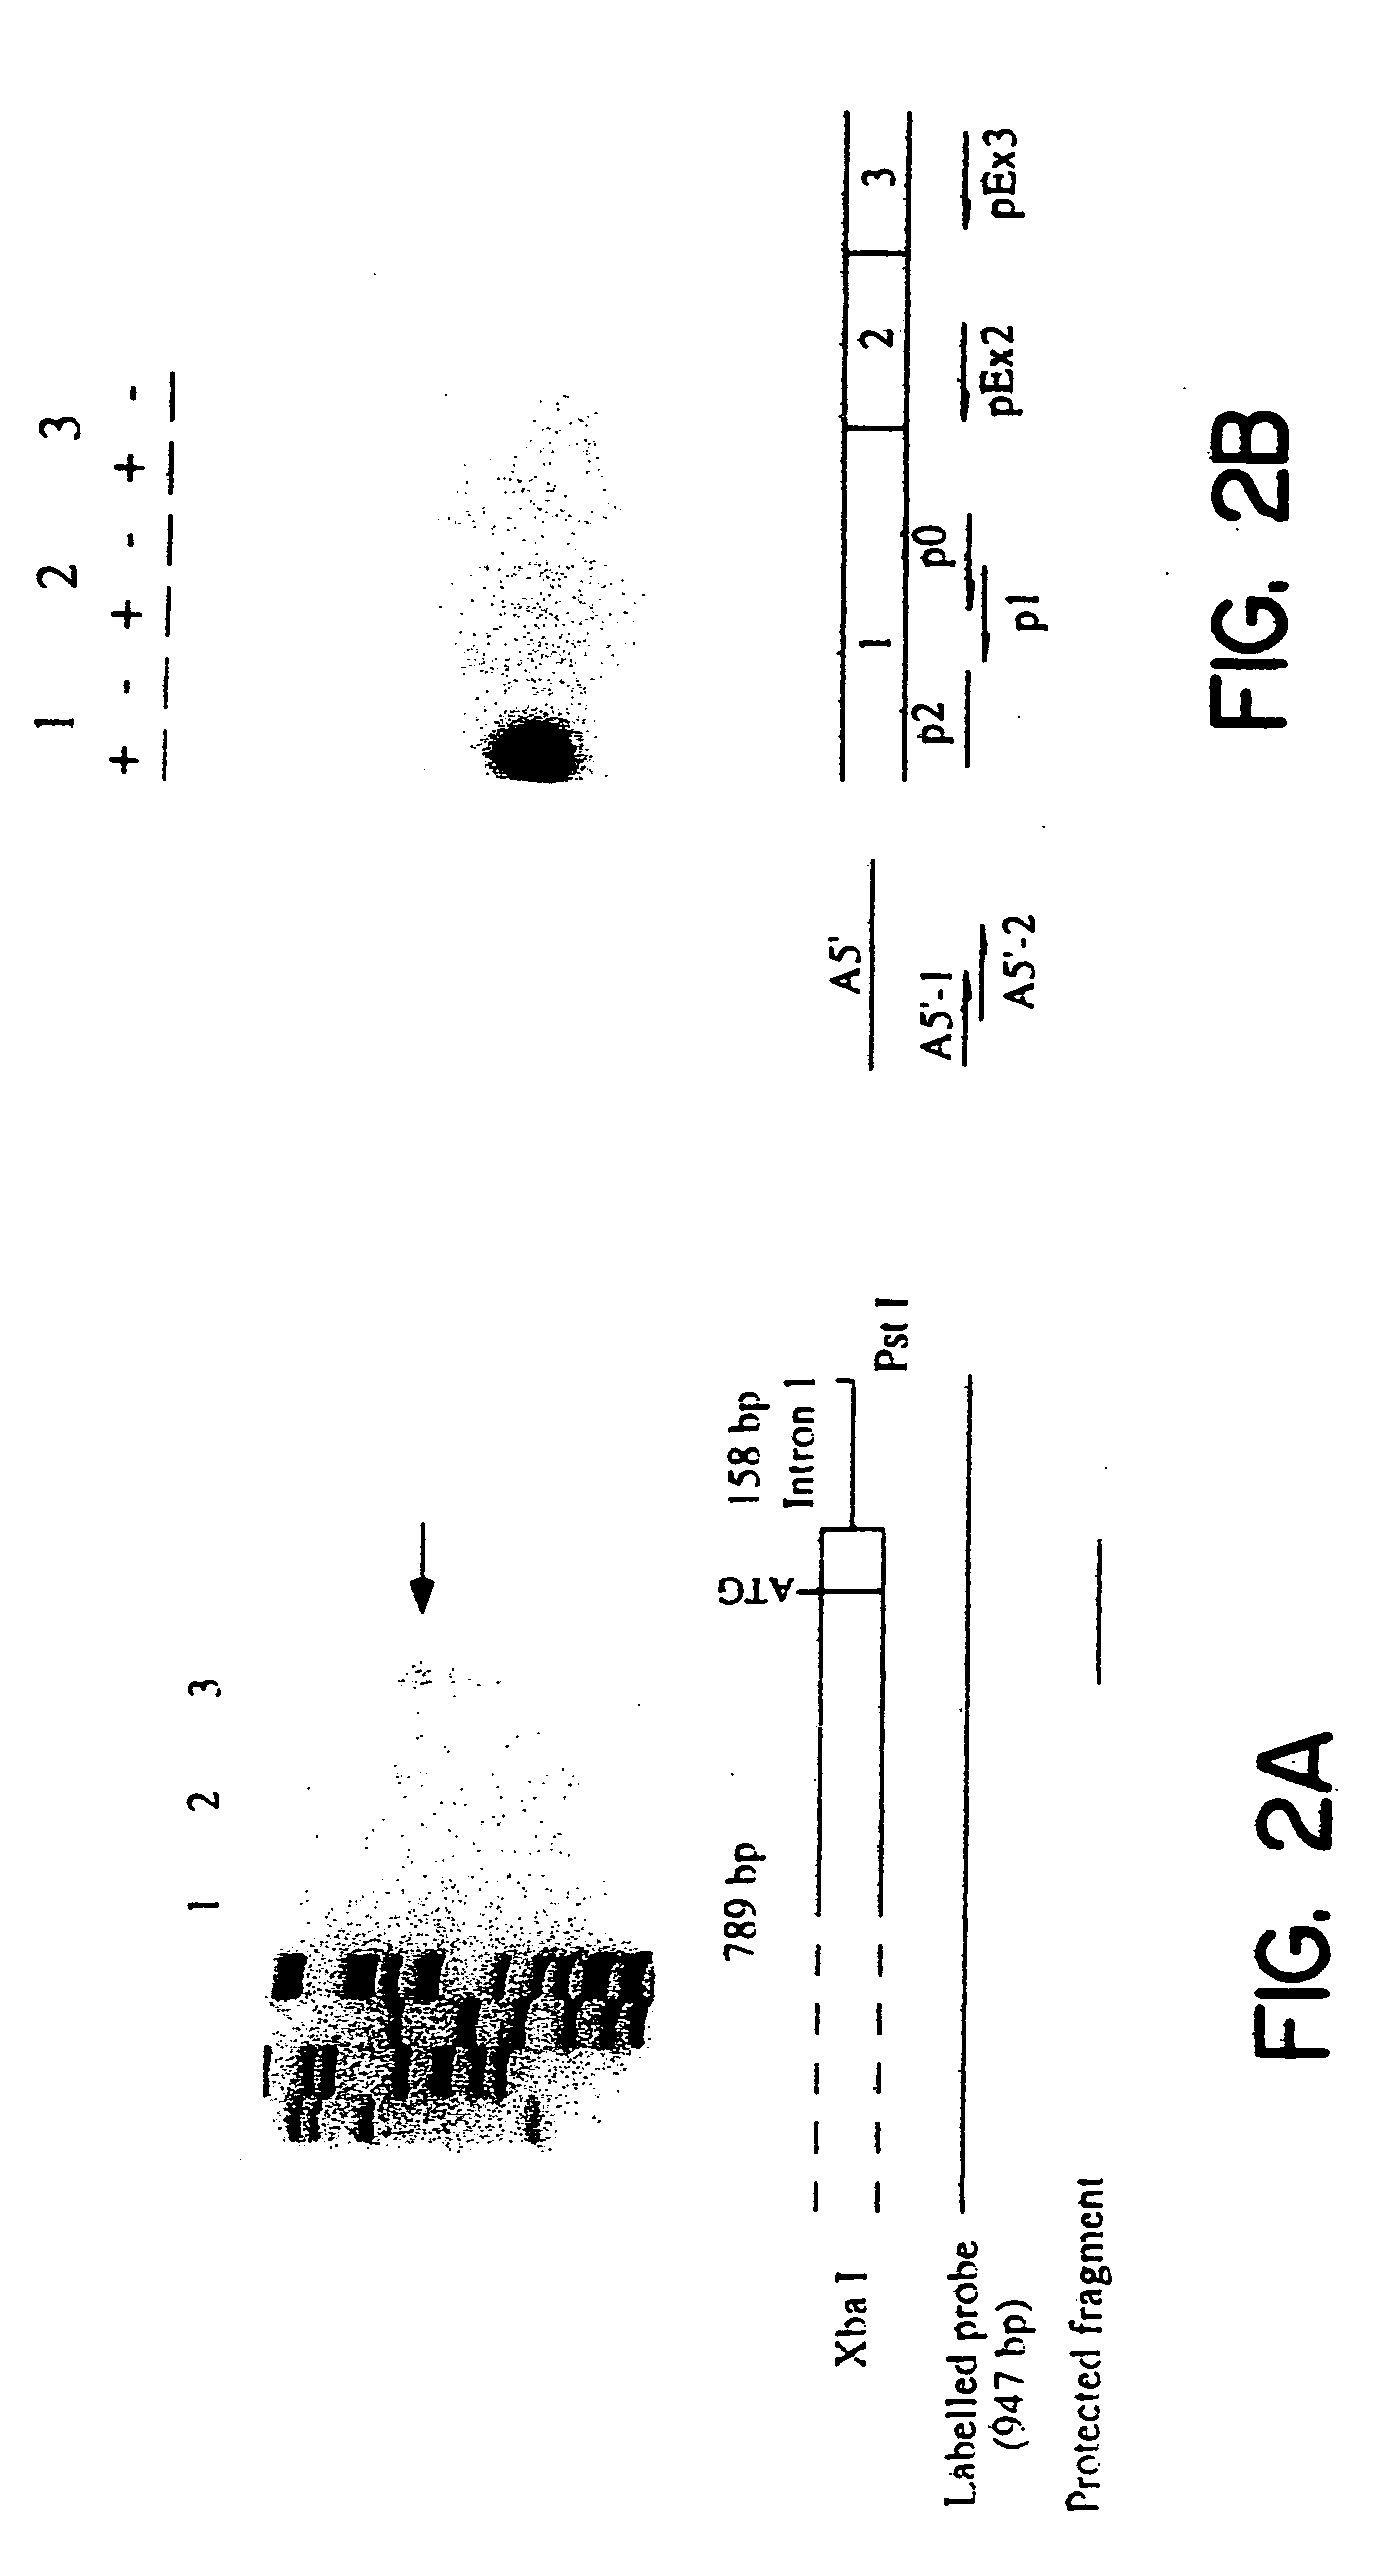 Genomic DNA fragments containing regulatory and coding sequence for the beta2-subunit of the neuronal nicotinic acetylcholine receptor and transgenic animals made using these fragments or mutated fragments